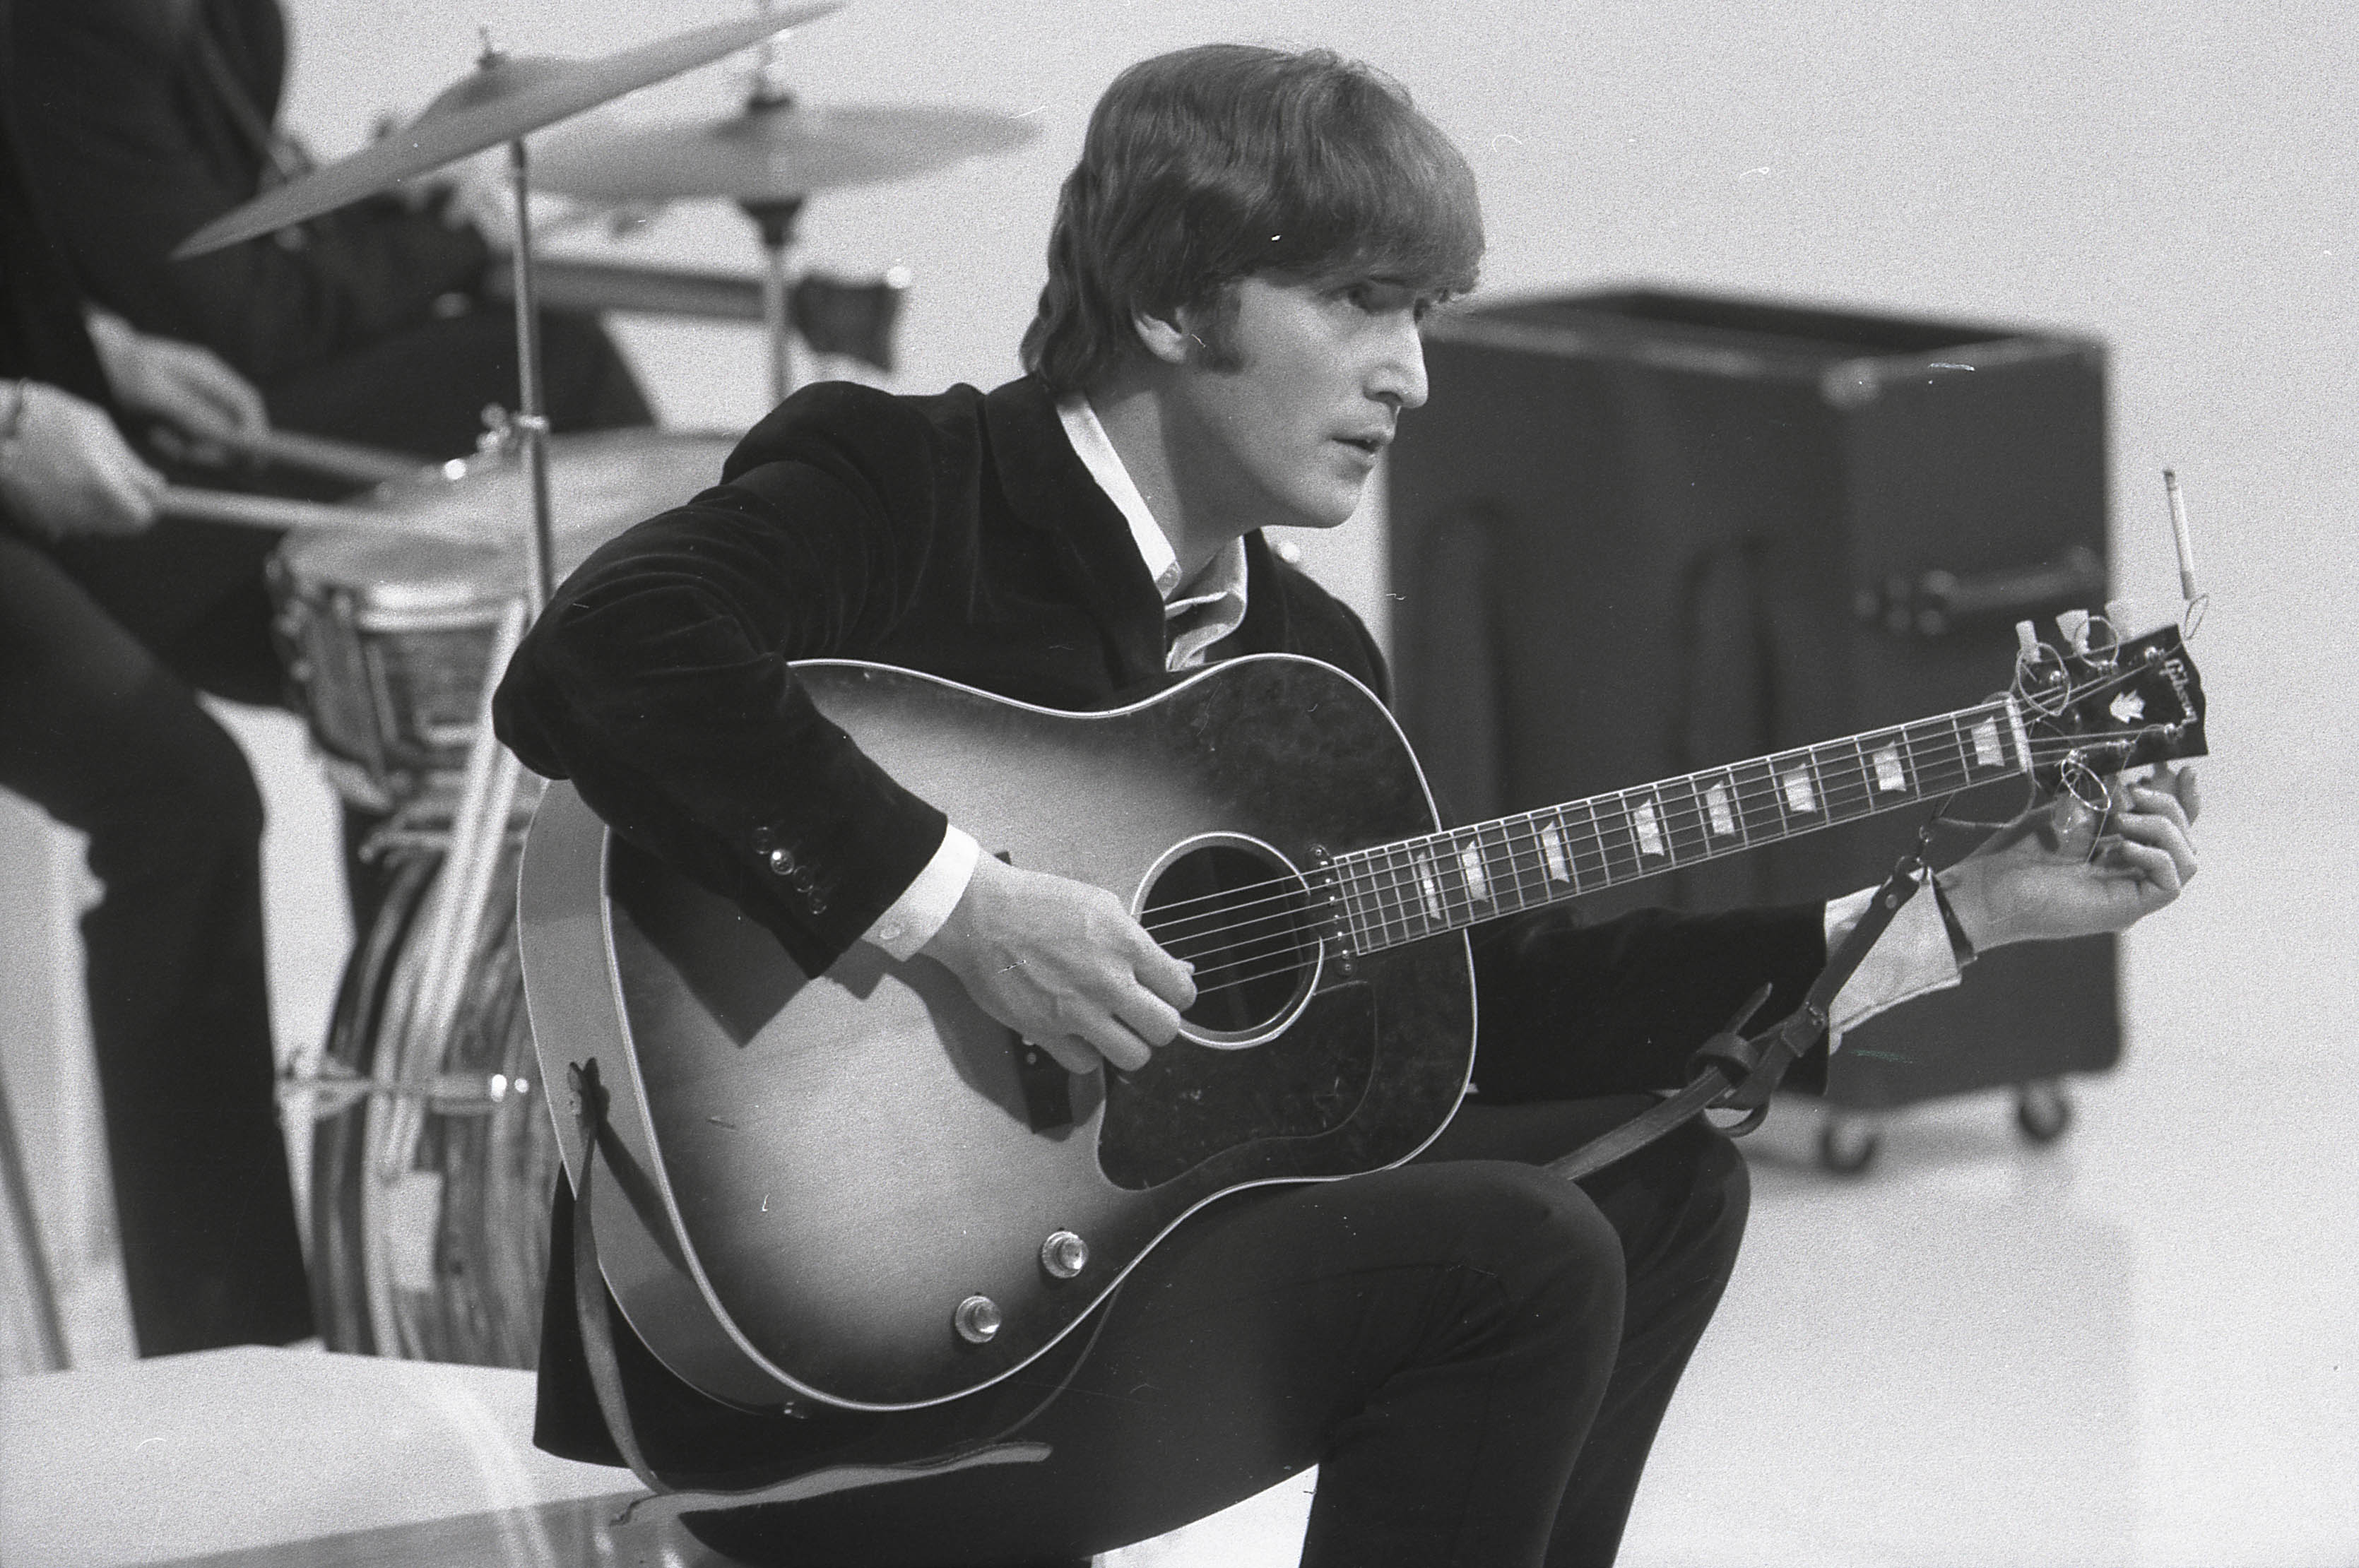 The Beatles' John Lennon playing songs on his guitar